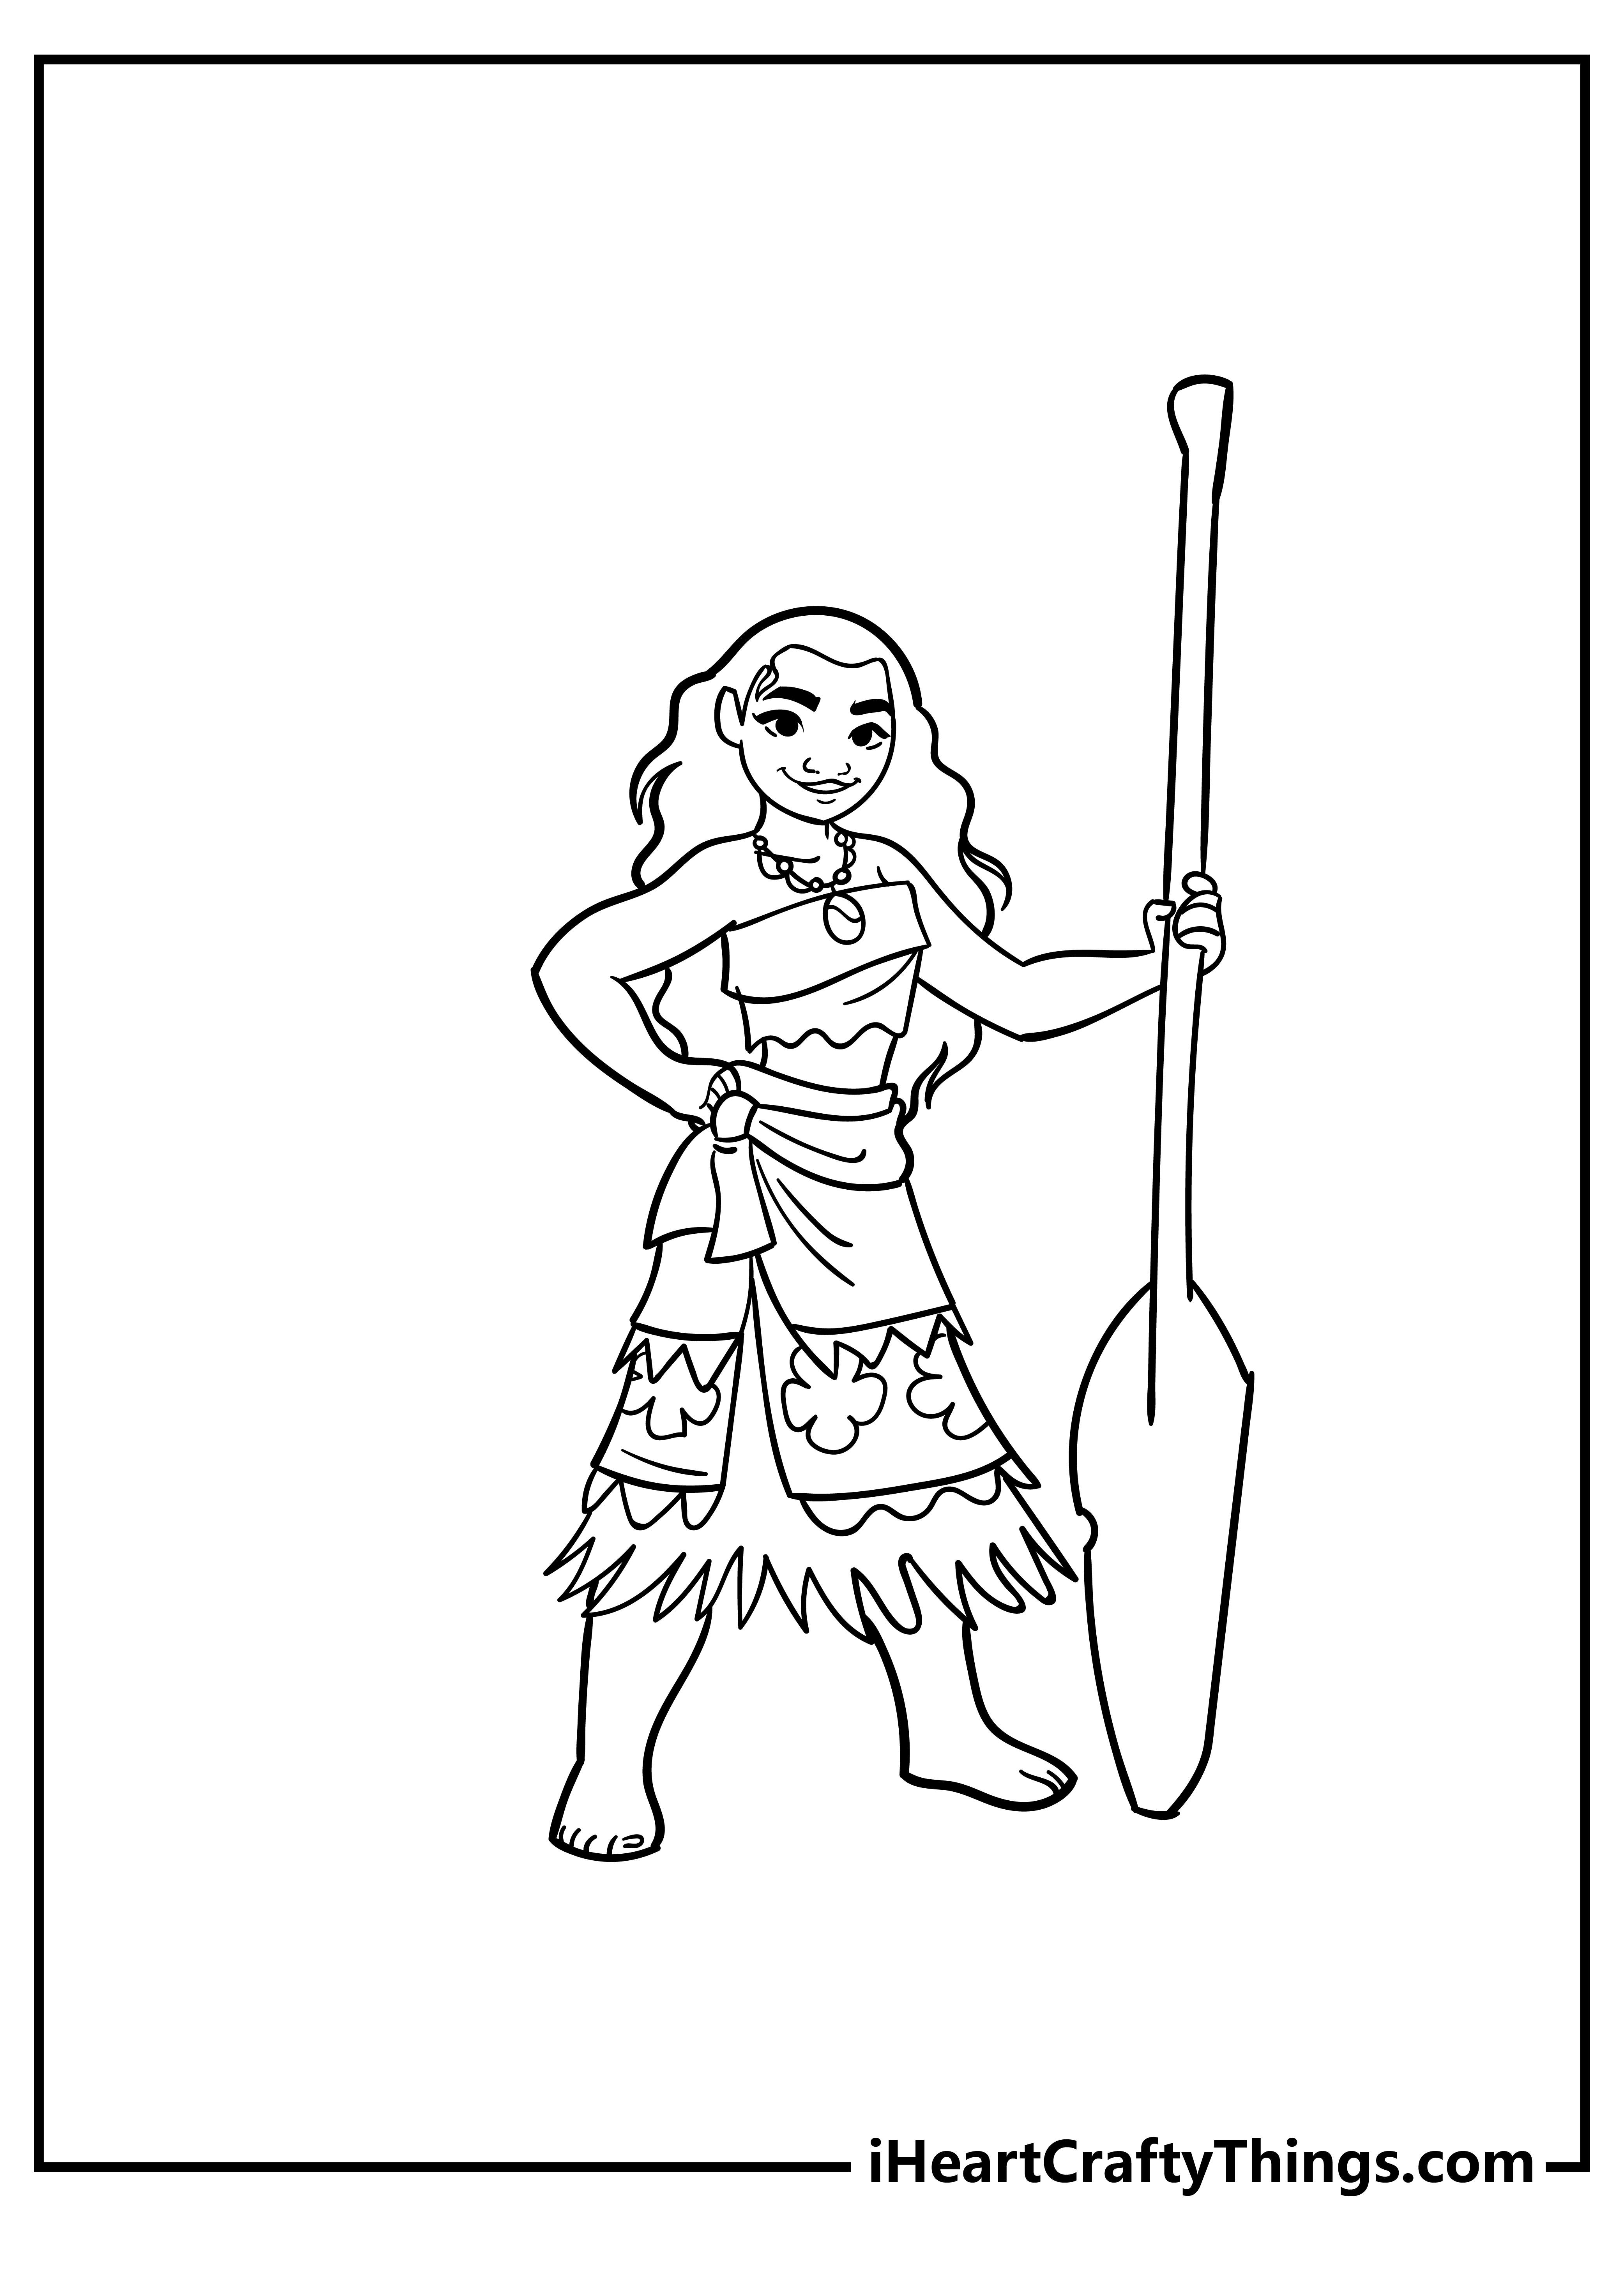 Moana Coloring Pages for kids free download